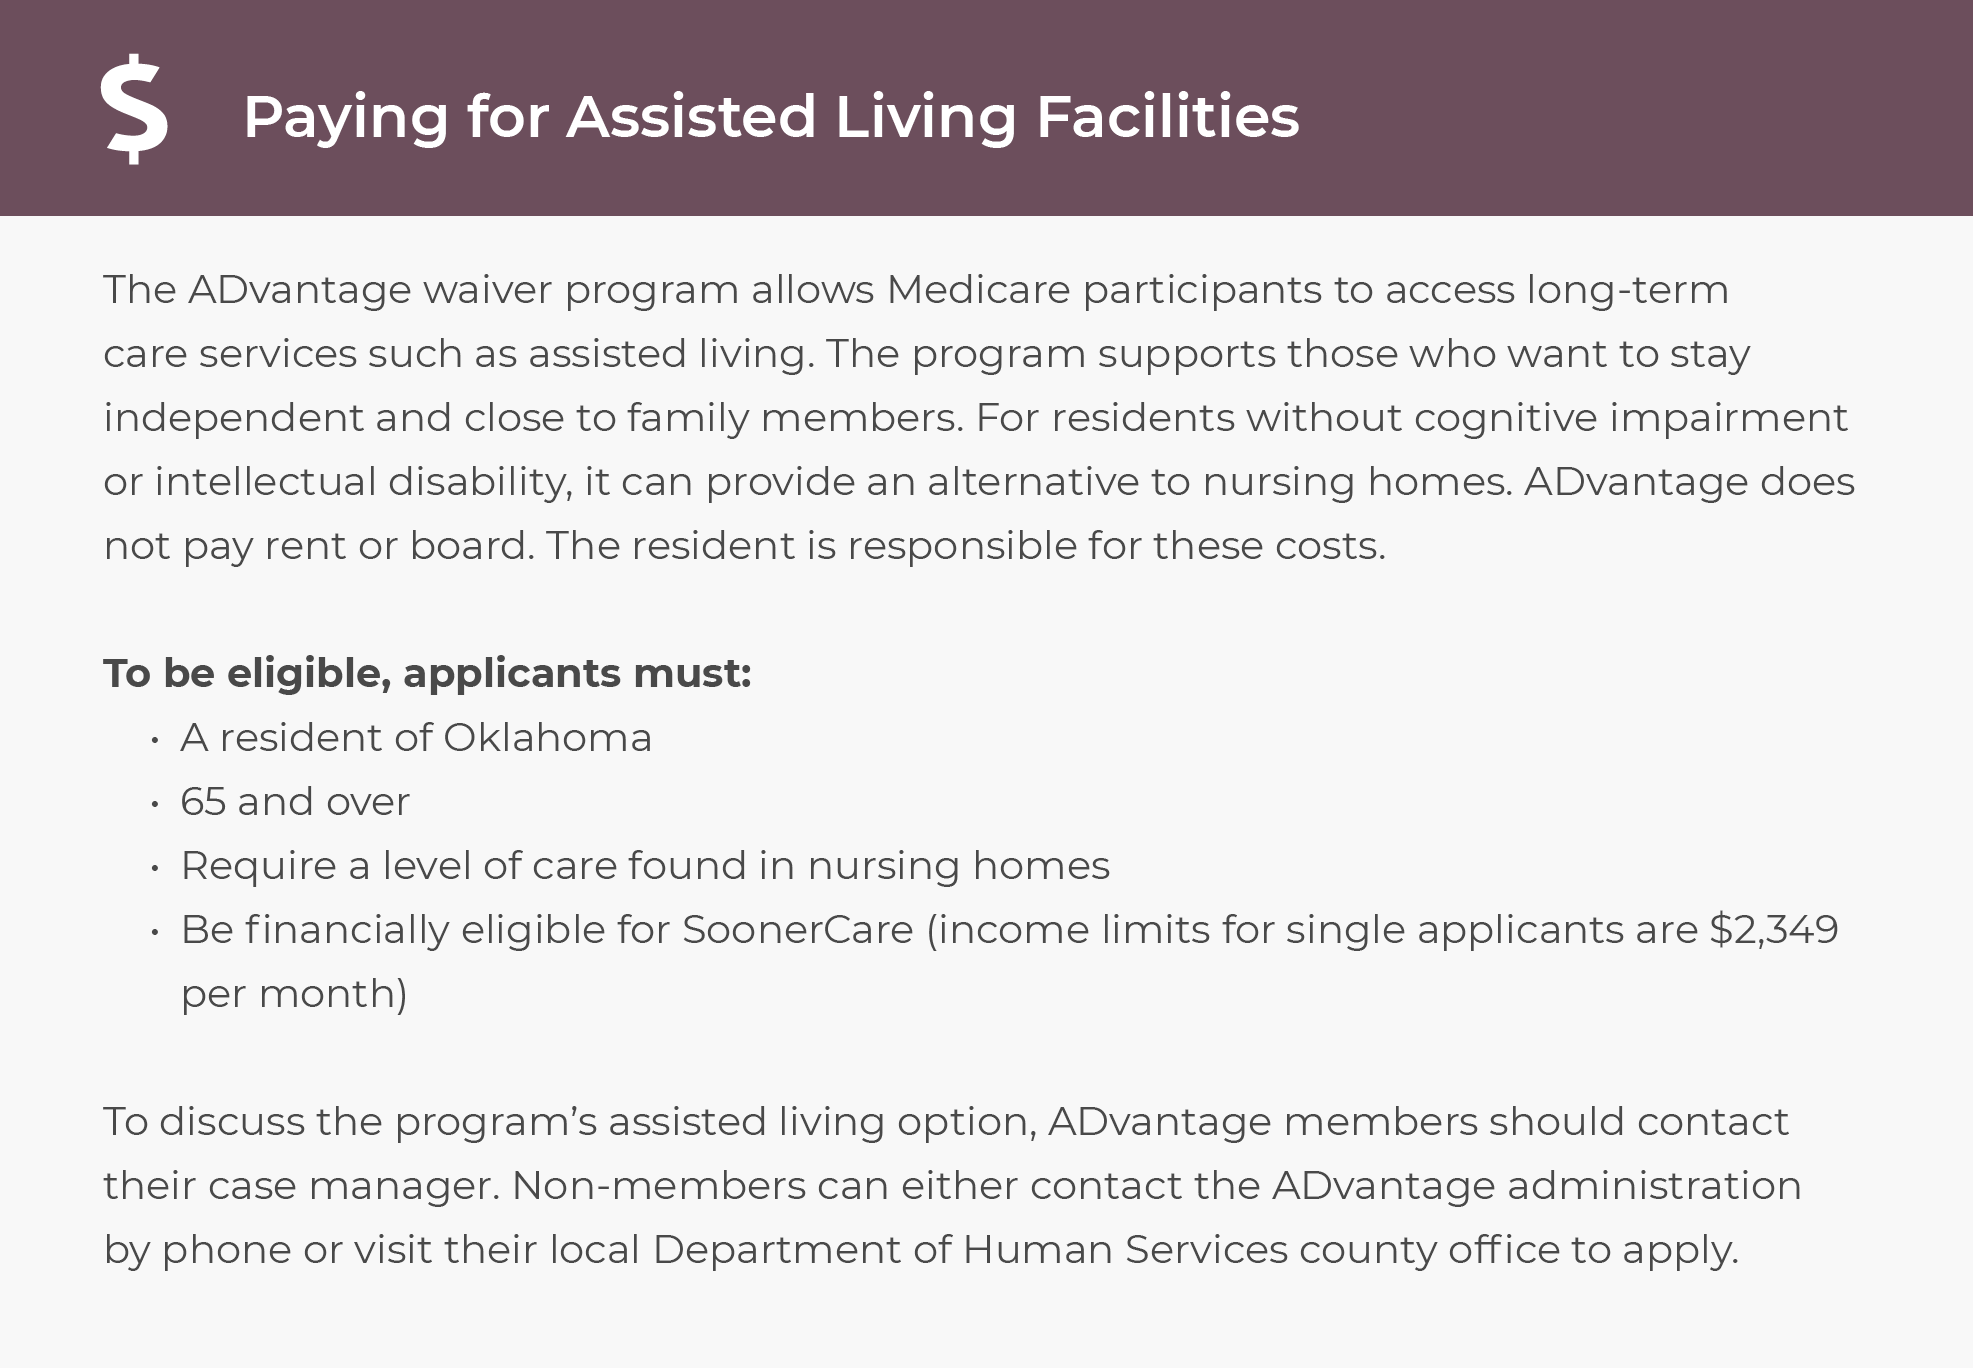 Paying for Assisted Living facilities in Oklahoma